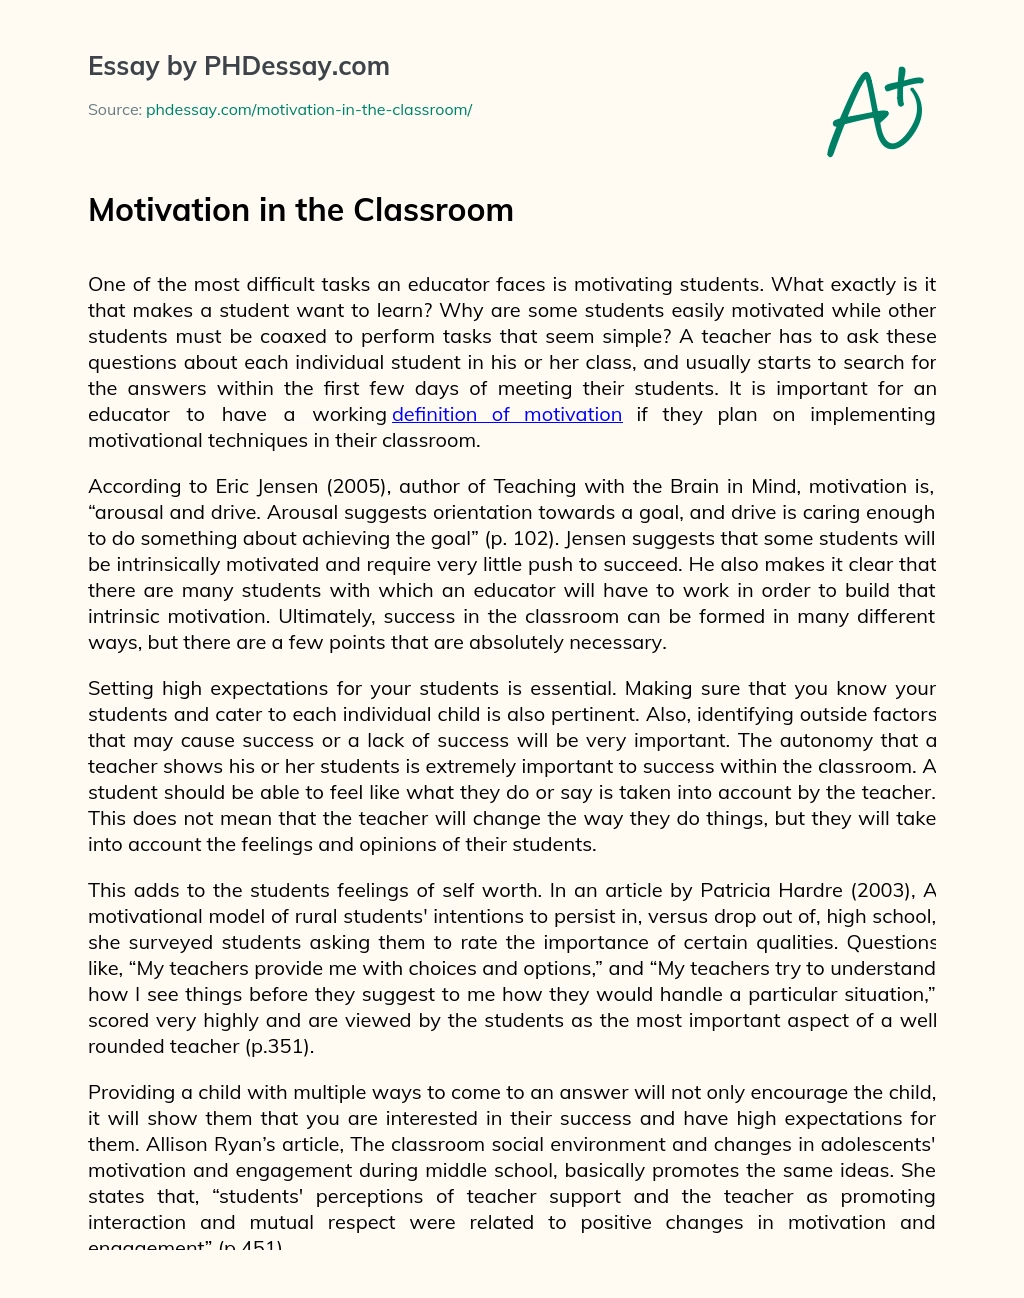 Motivation in the Classroom essay